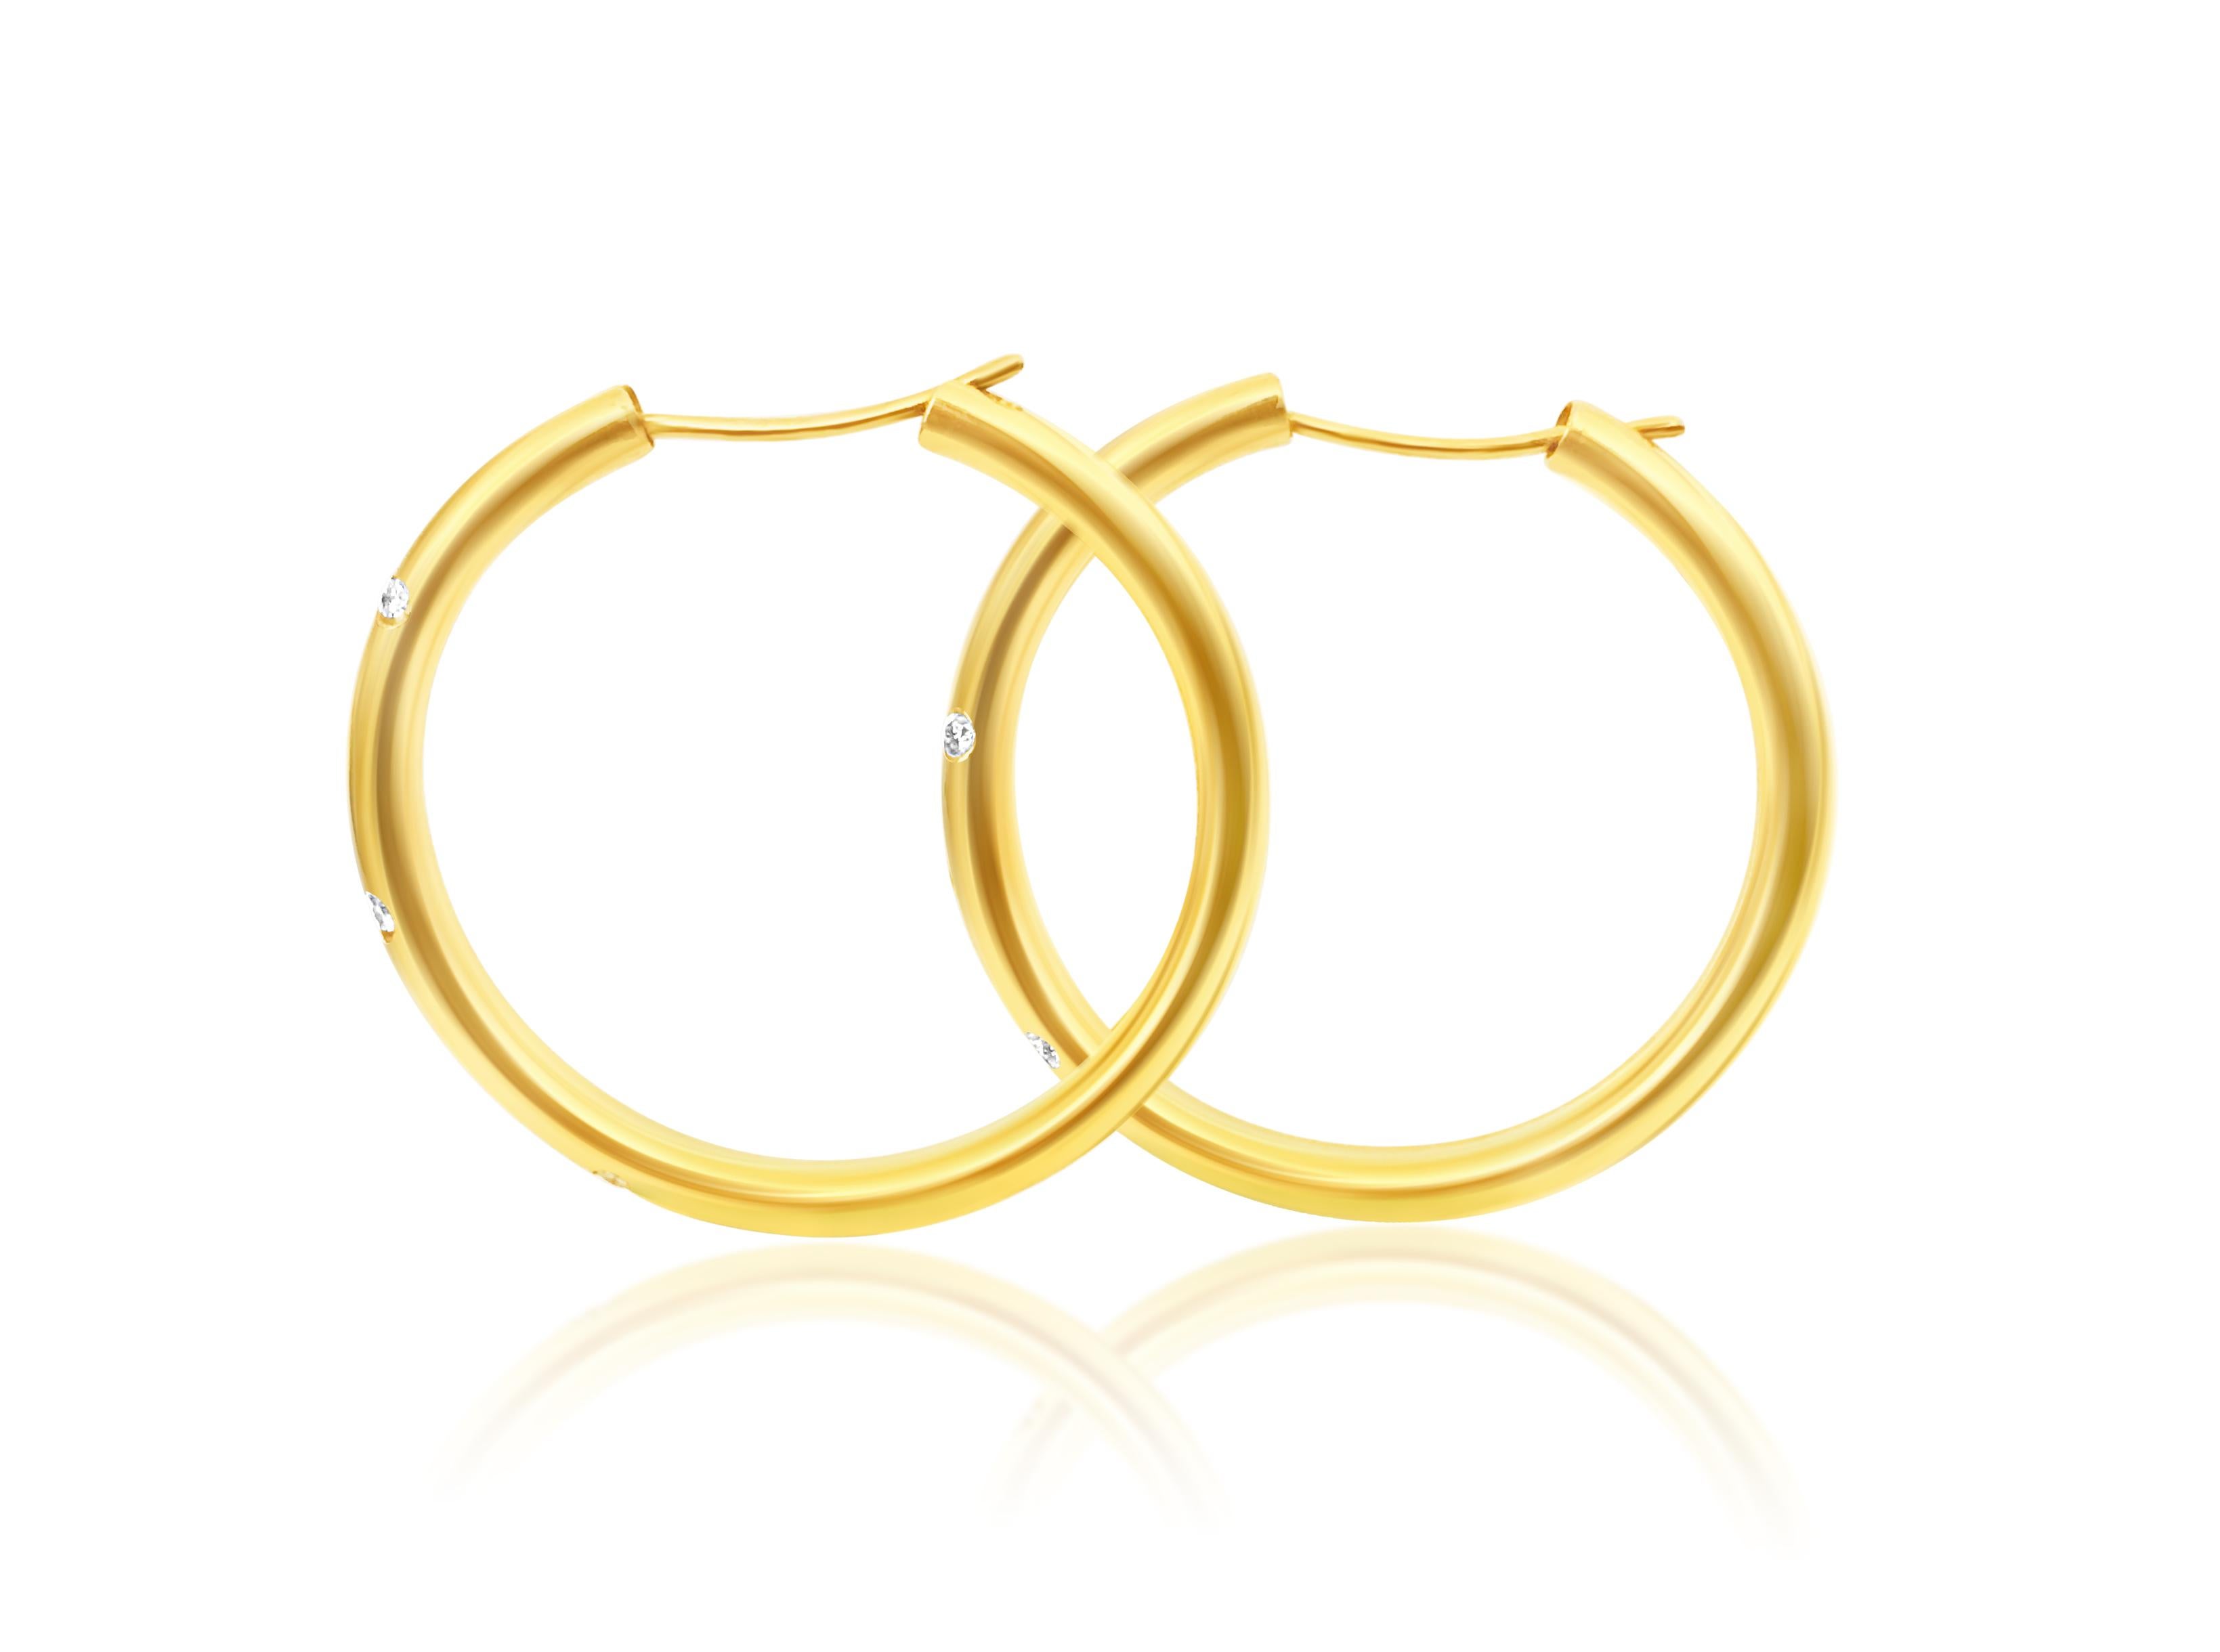 Metal: 18k yellow gold. 

1/3 carat diamonds total. 

VS clarity and G color. 

Round brilliant cut diamonds. 100% natural earth mined and genuine diamonds. 

Gorgeous European style ladies gold and diamond chic hoop earrings. Simple and elegant